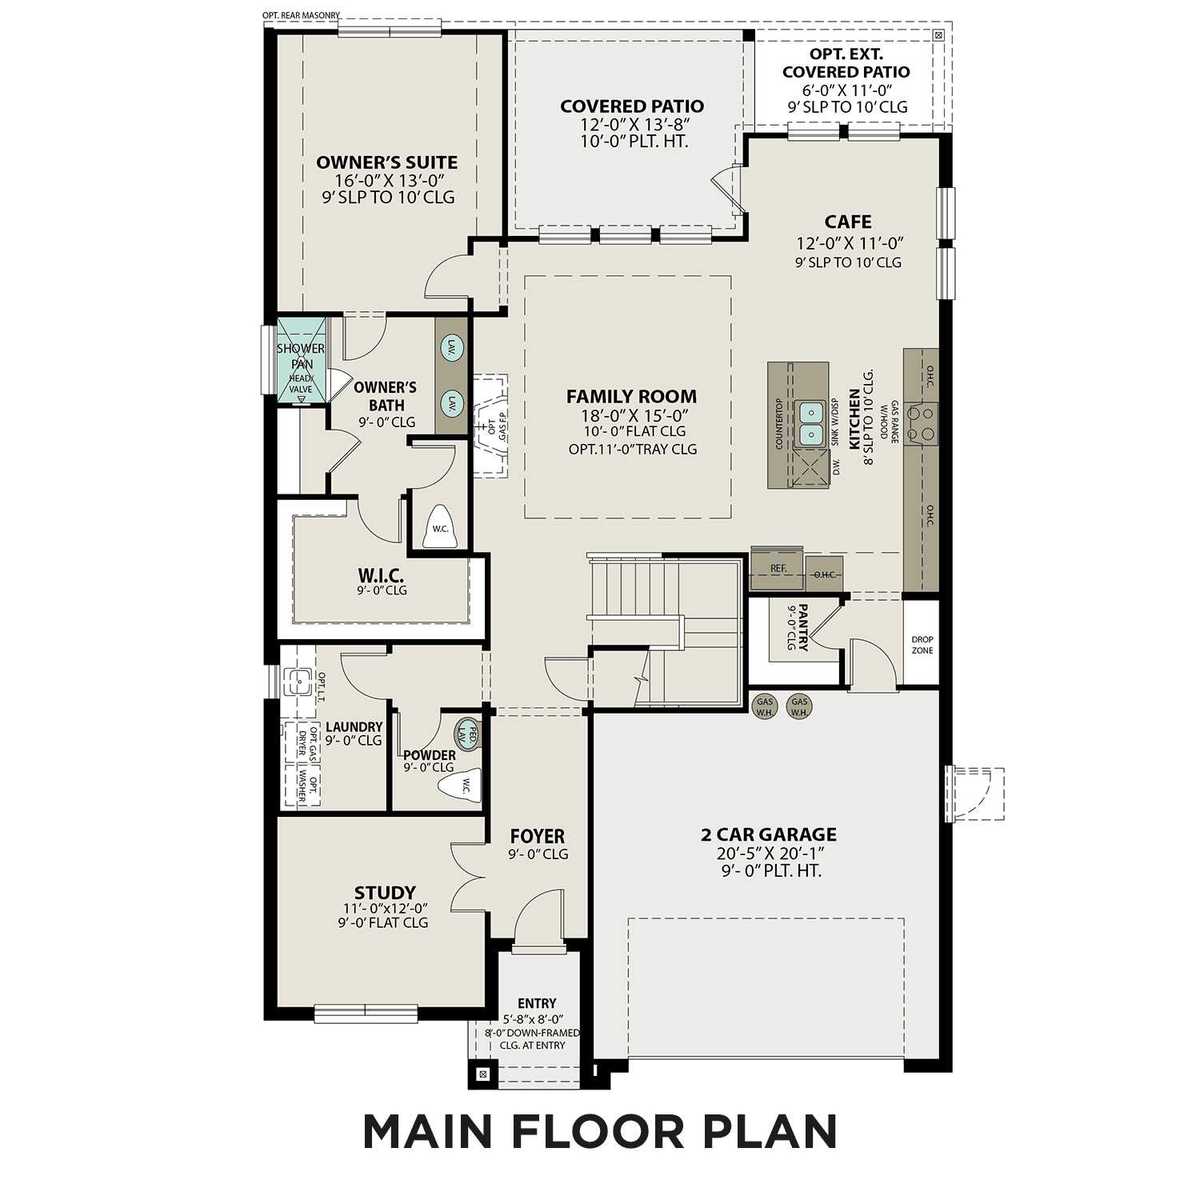 1 - The Sequoia A buildable floor plan layout in Davidson Homes' Enclave at Newport community.